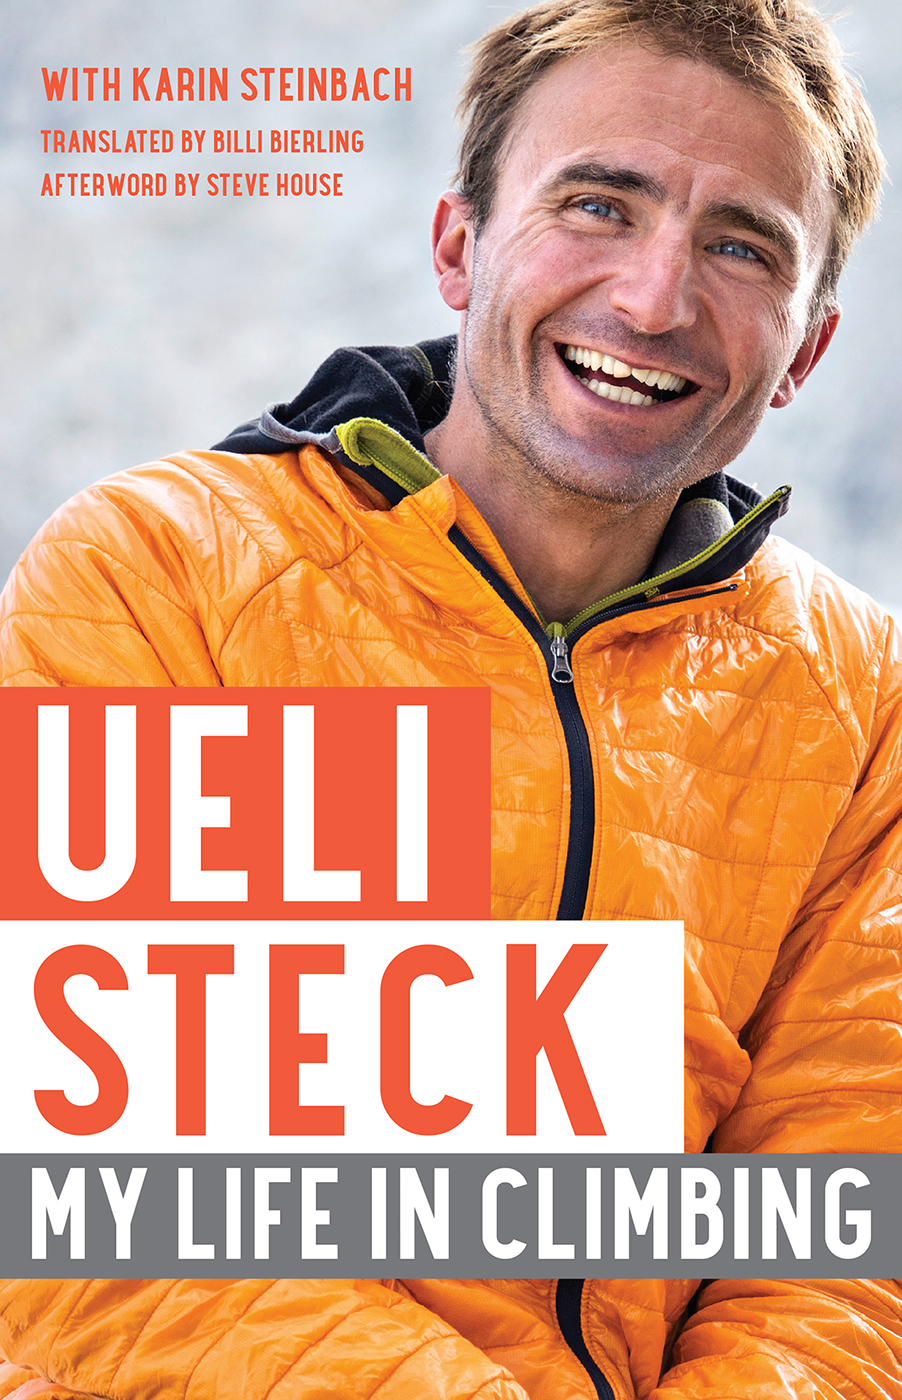 UELI STECK WITH KARIN STEINBACH TRANSLATED BY BILLI BIERLING AFTERWORD BY - photo 1